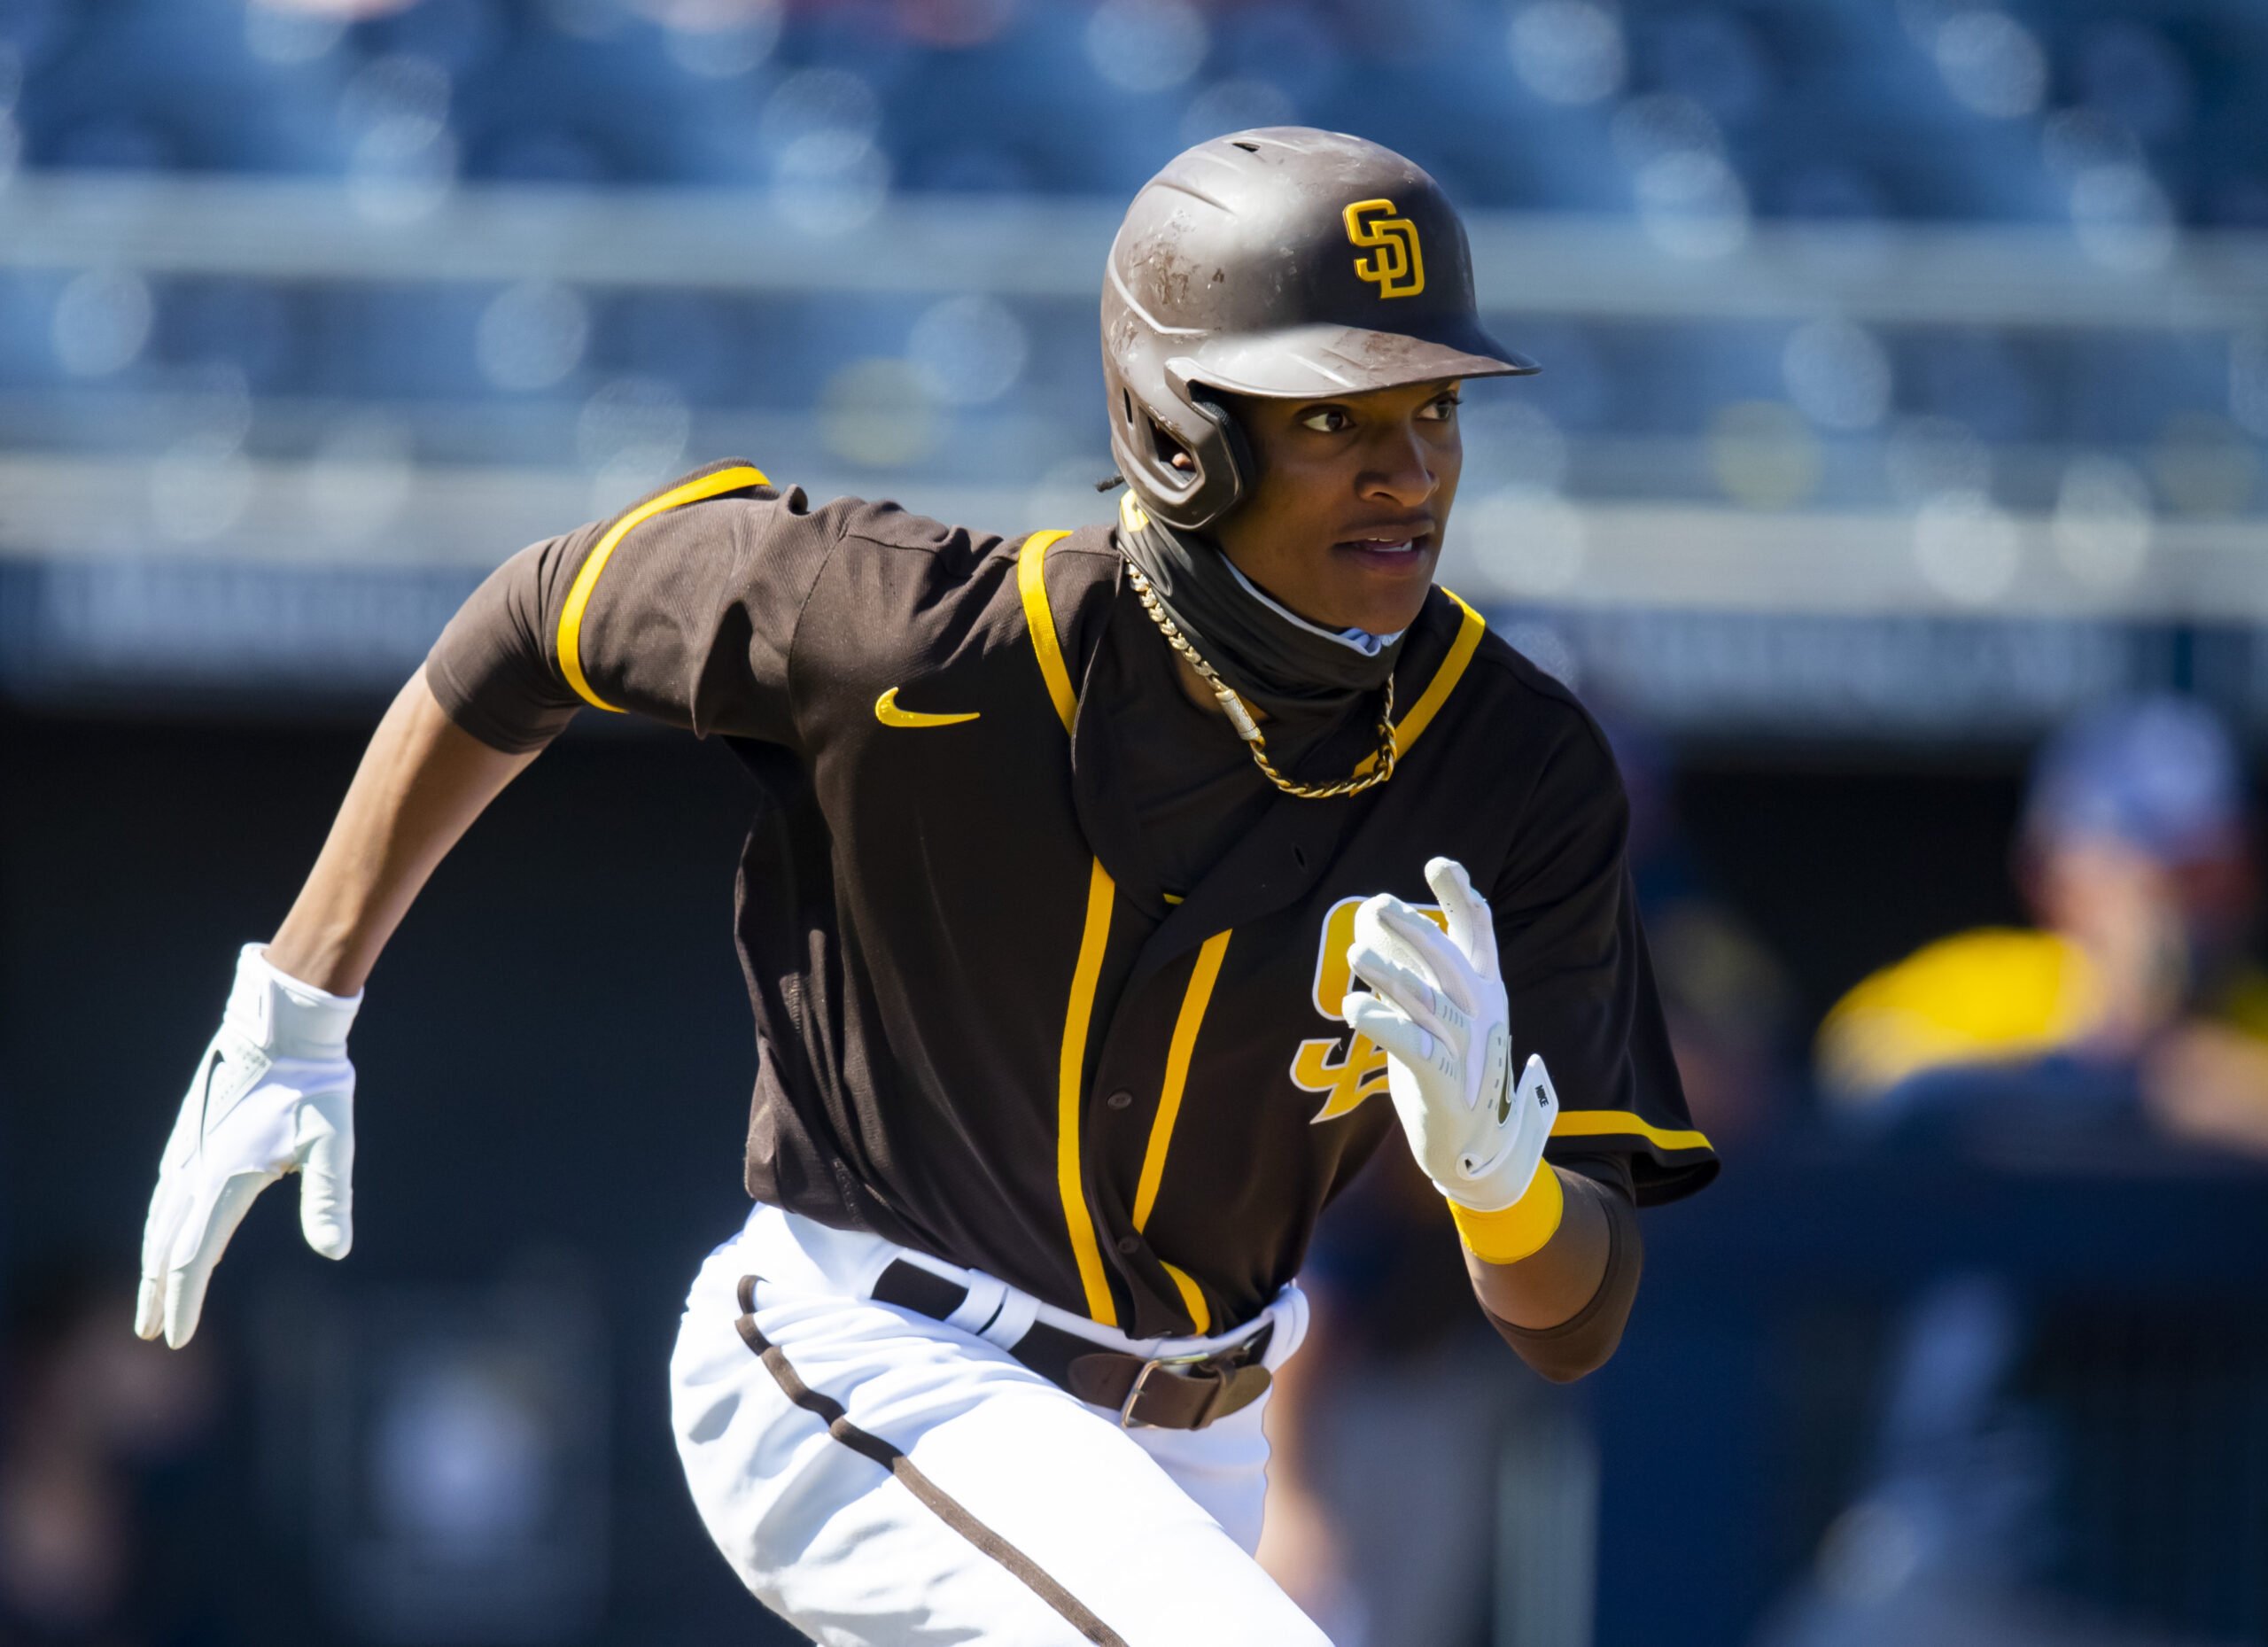 Padres 2020 Spring Training Preview: Players and positions to watch